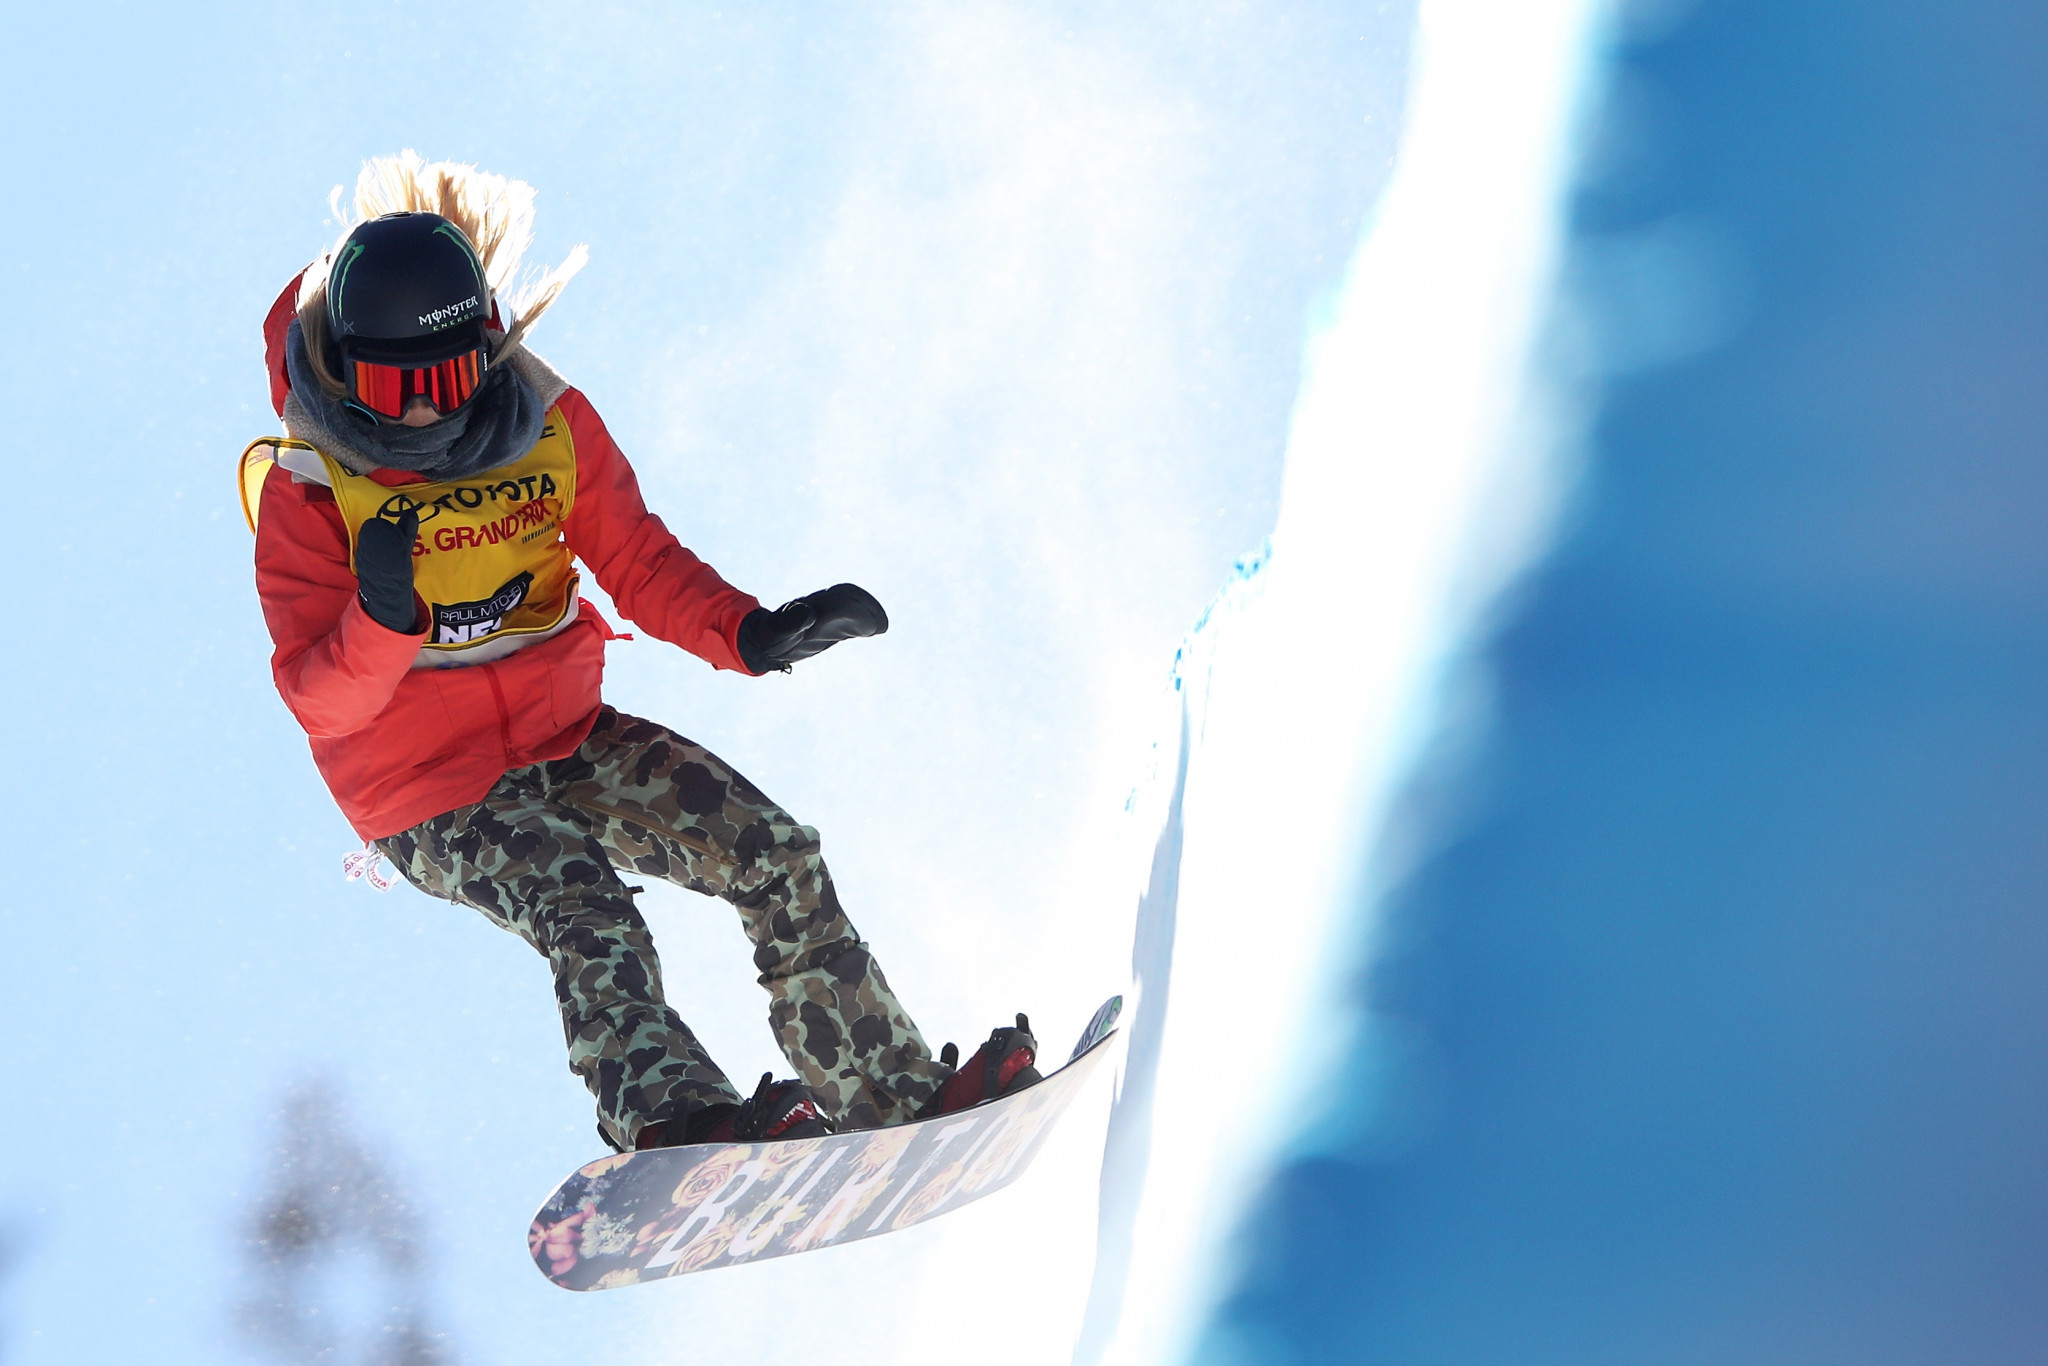 Chloe Kim will be among the favourites in the women's snowboard halfpipe event ©Getty Images